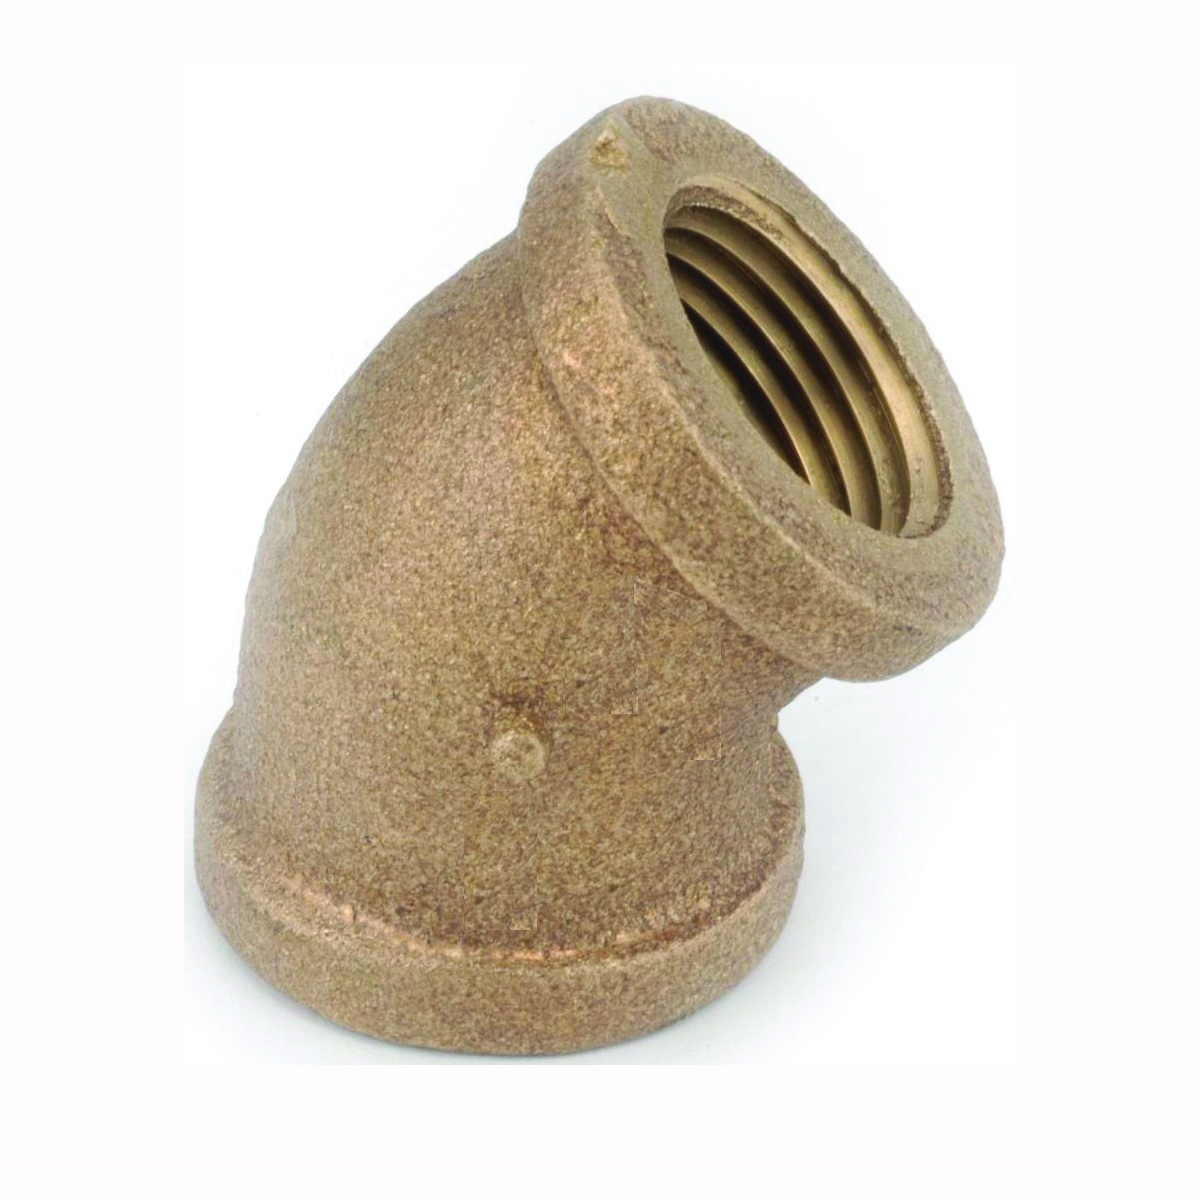 738107-12 Pipe Elbow, 3/4 in, FIP, 45 deg Angle, Brass, Rough, 200 psi Pressure